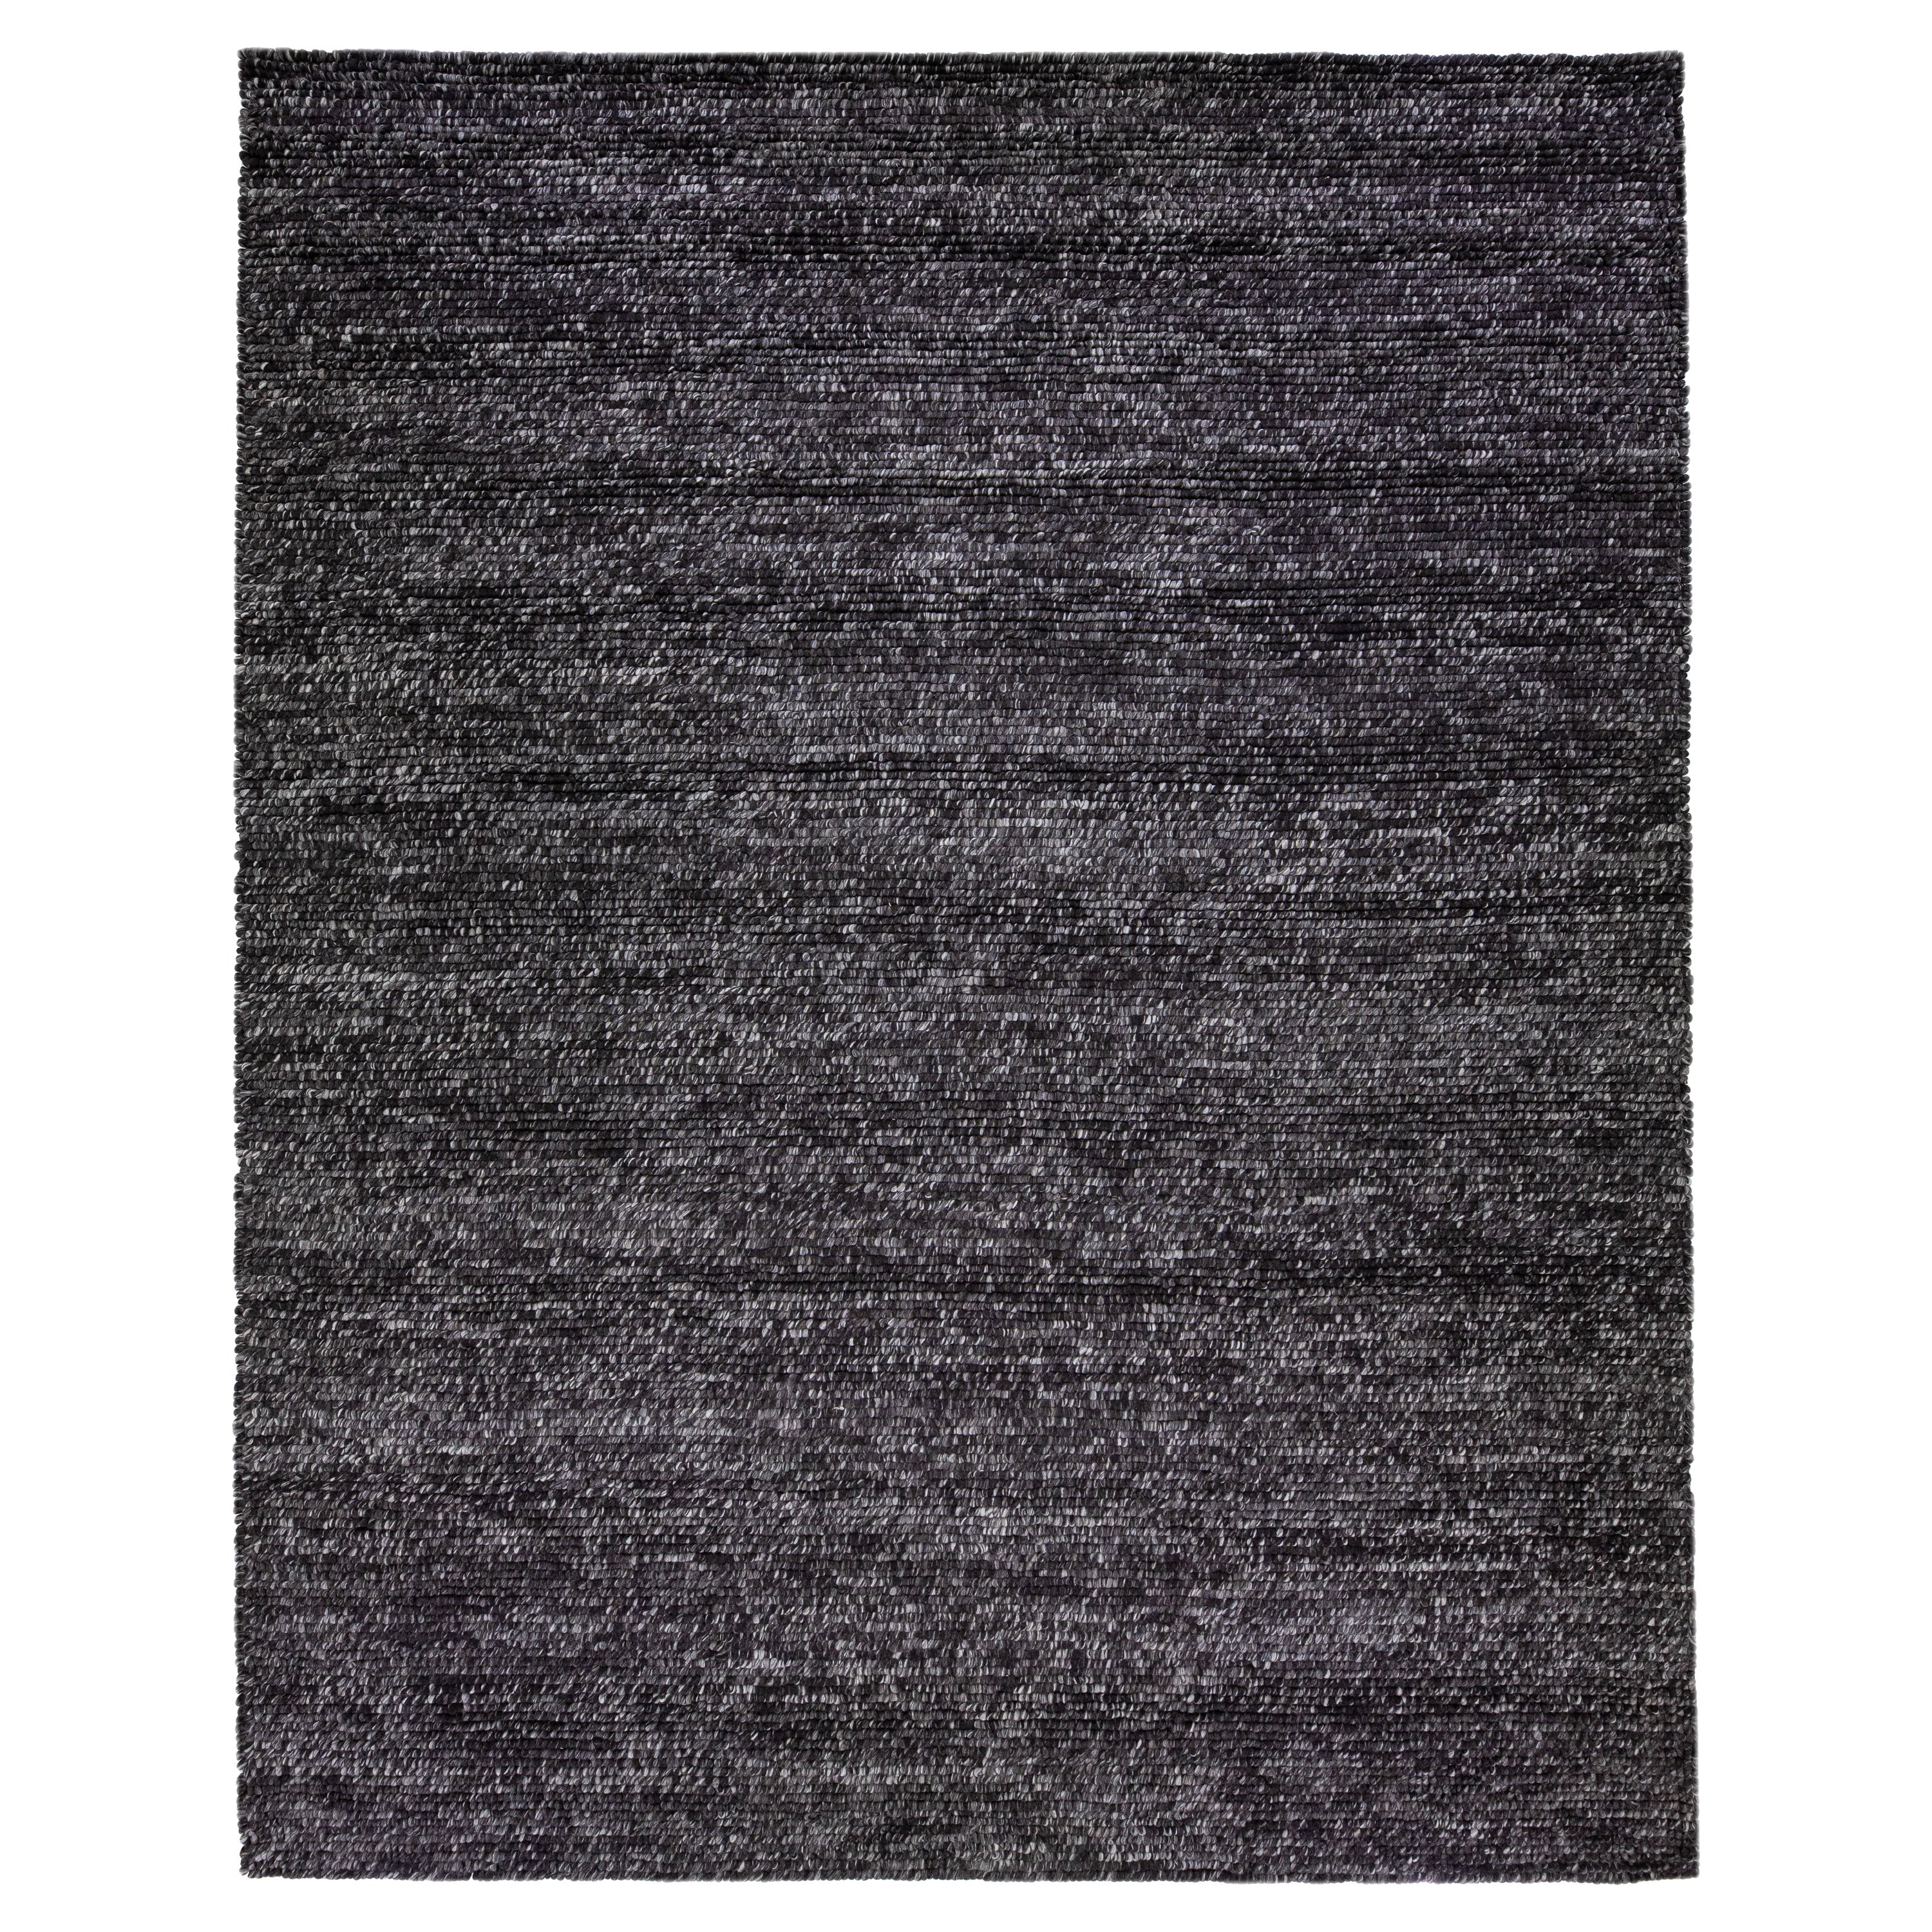 Gray-Charcoal Color Modern Felted Textuted Wool Rug by Apadana For Sale